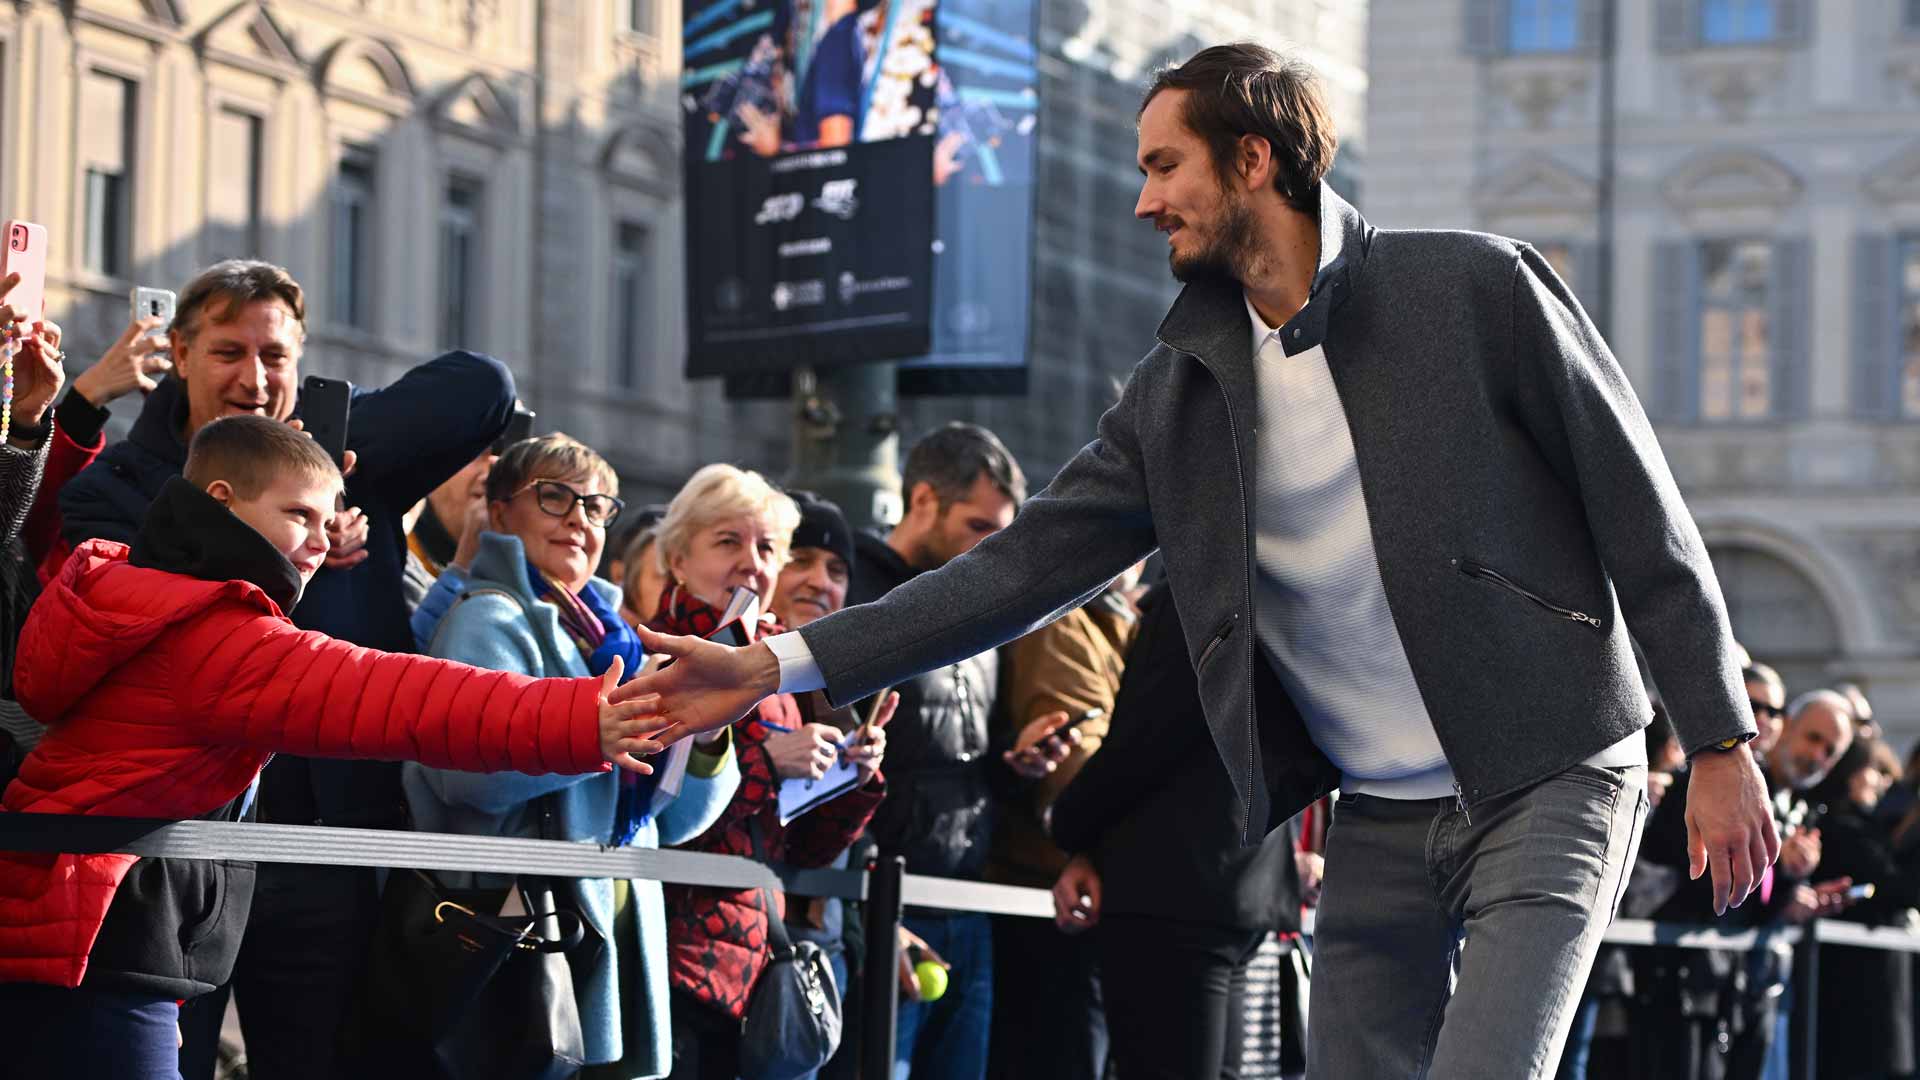 Daniil Medvedev interacting with the fans at the 2022 Nitto ATP Finals media day.